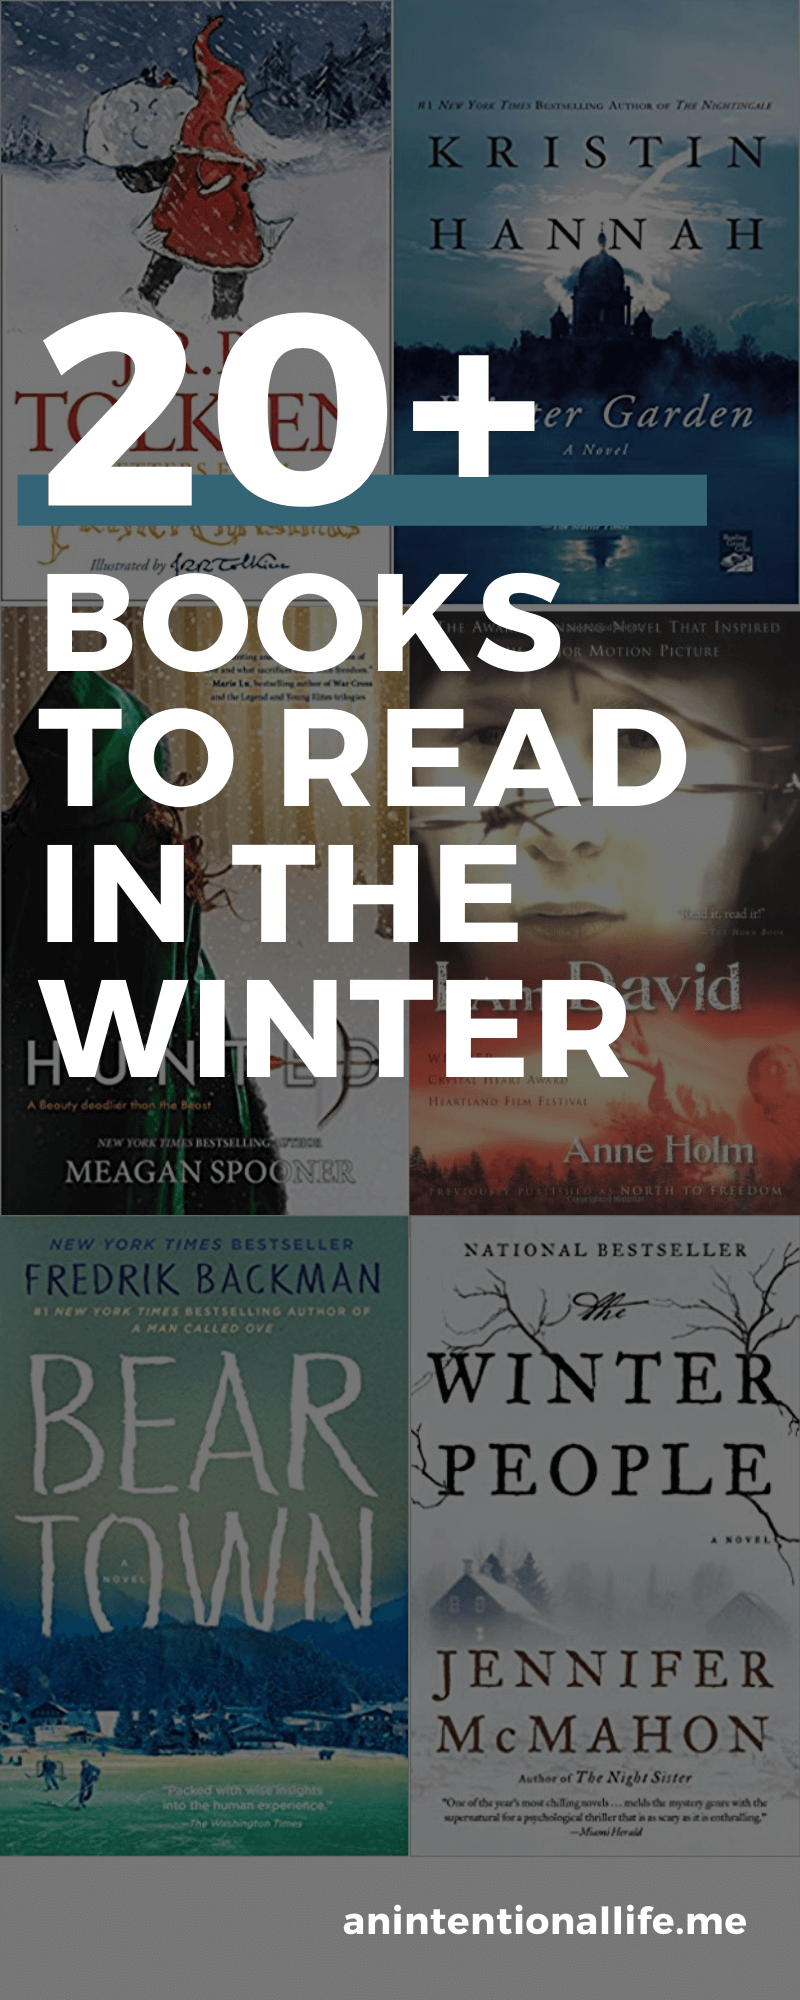 The Best Books to Read in the Winter - novels to cozy up with all winter long